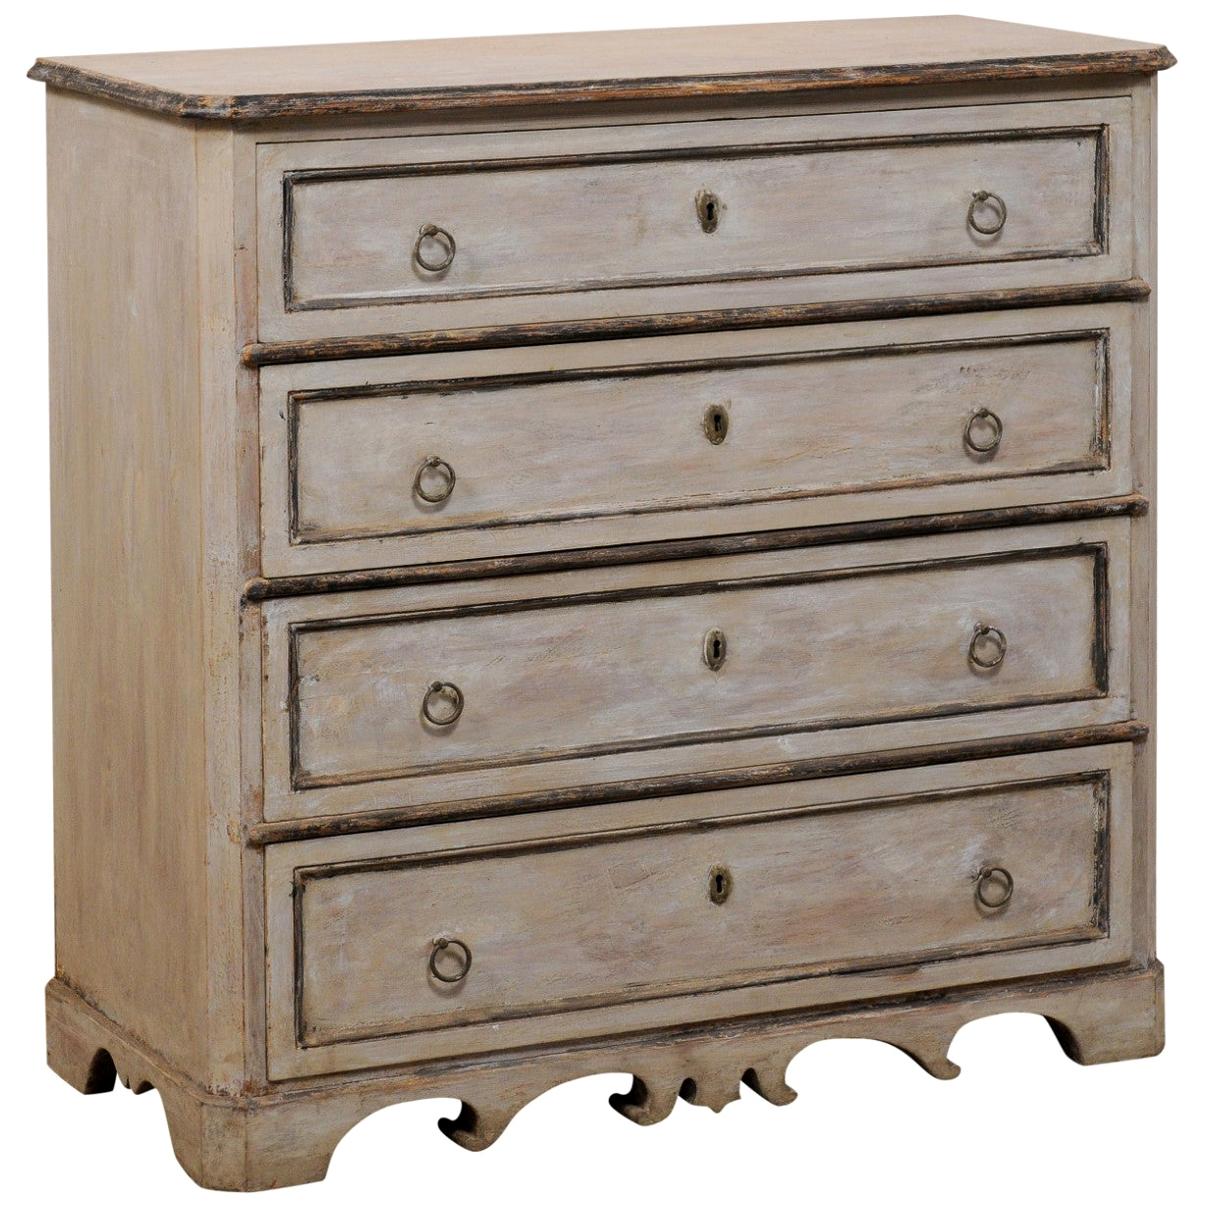 Swedish Karl Johan Painted Wood Chest with Ornately Carved Skirt